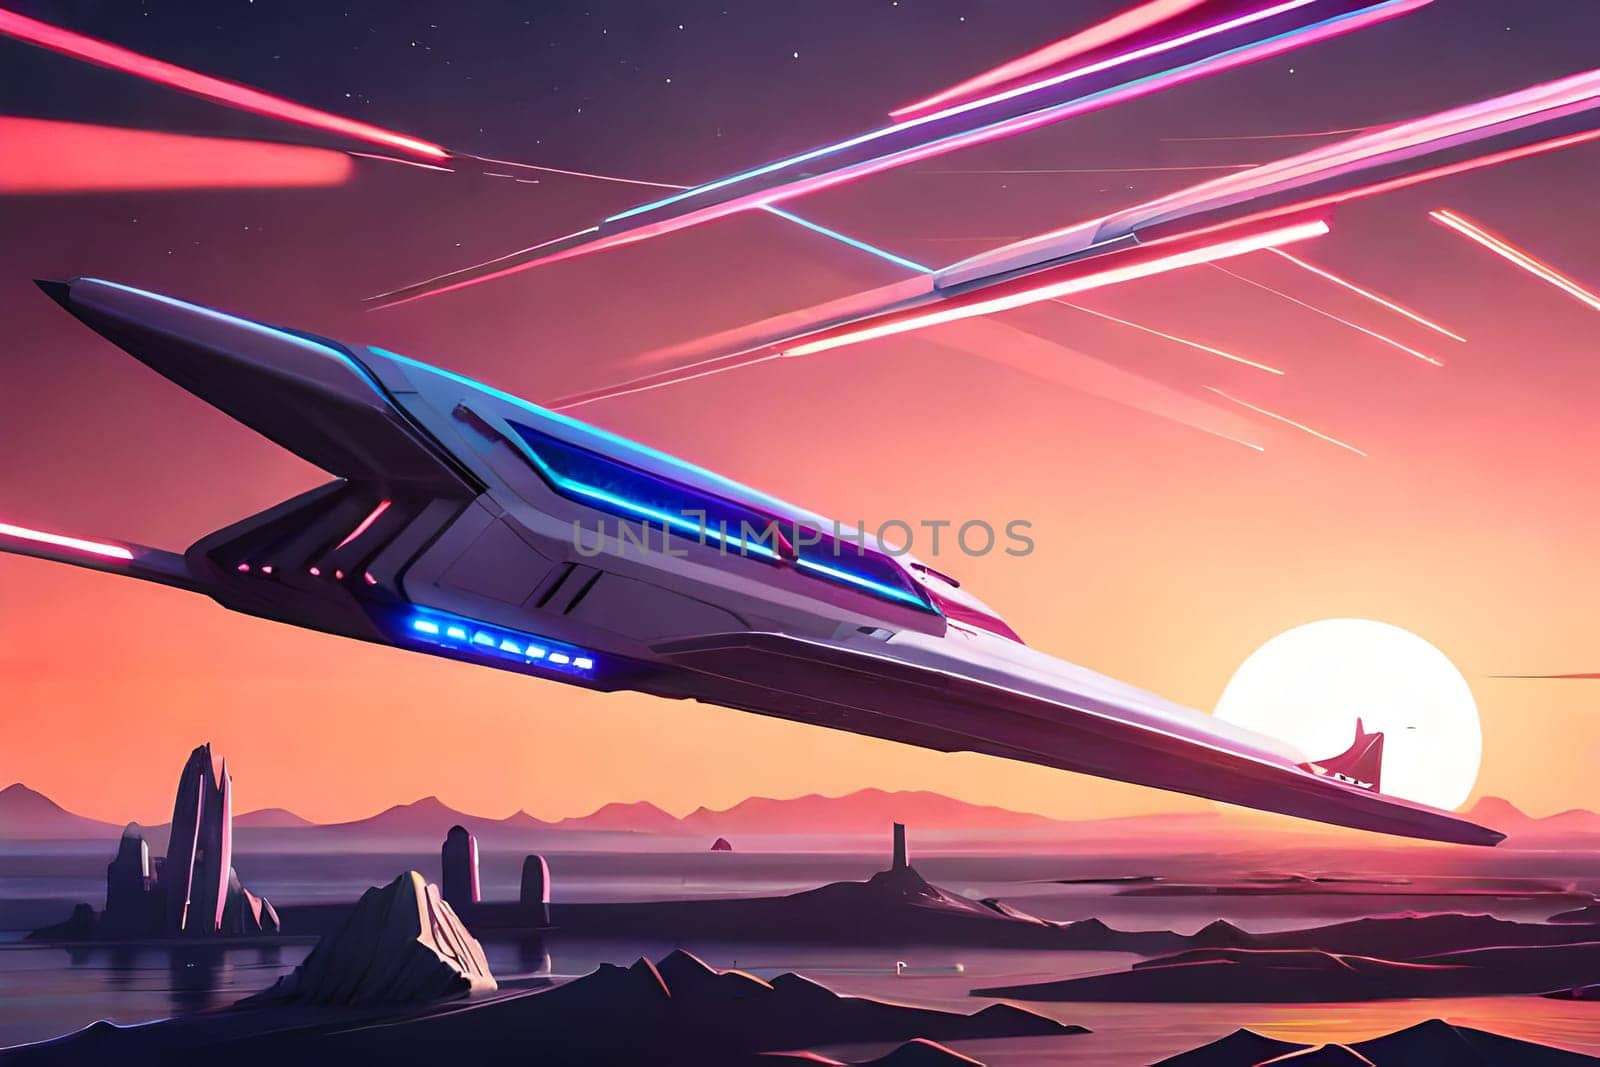 A futuristic scene with a spaceship in the distance and a planet in the background. by milastokerpro